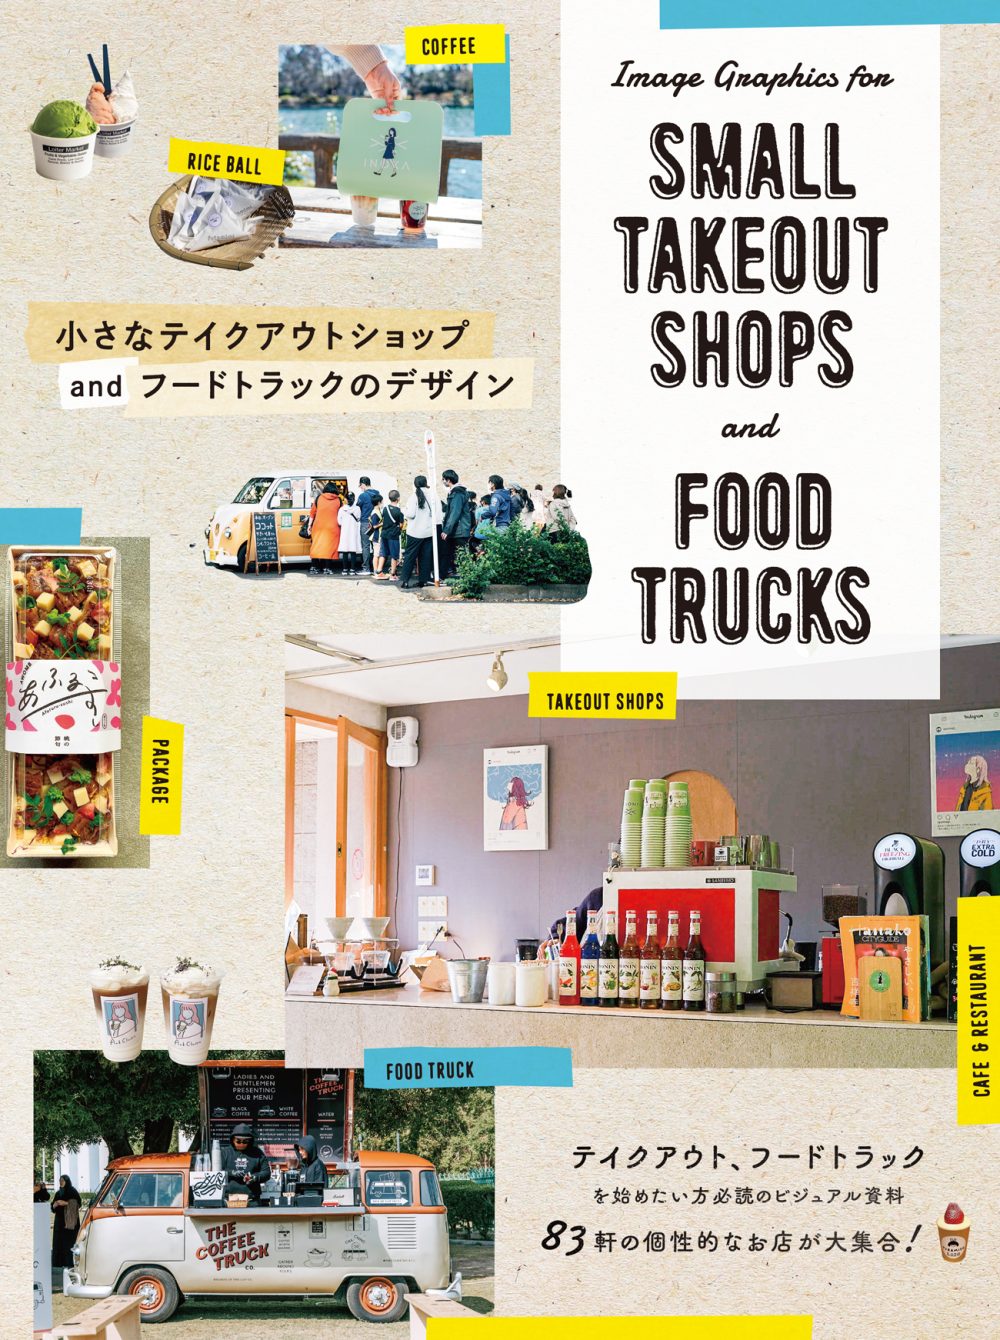 Image Graphics for Small Takeout Shops and Food Trucks (Japanese only, mostly visual) cover